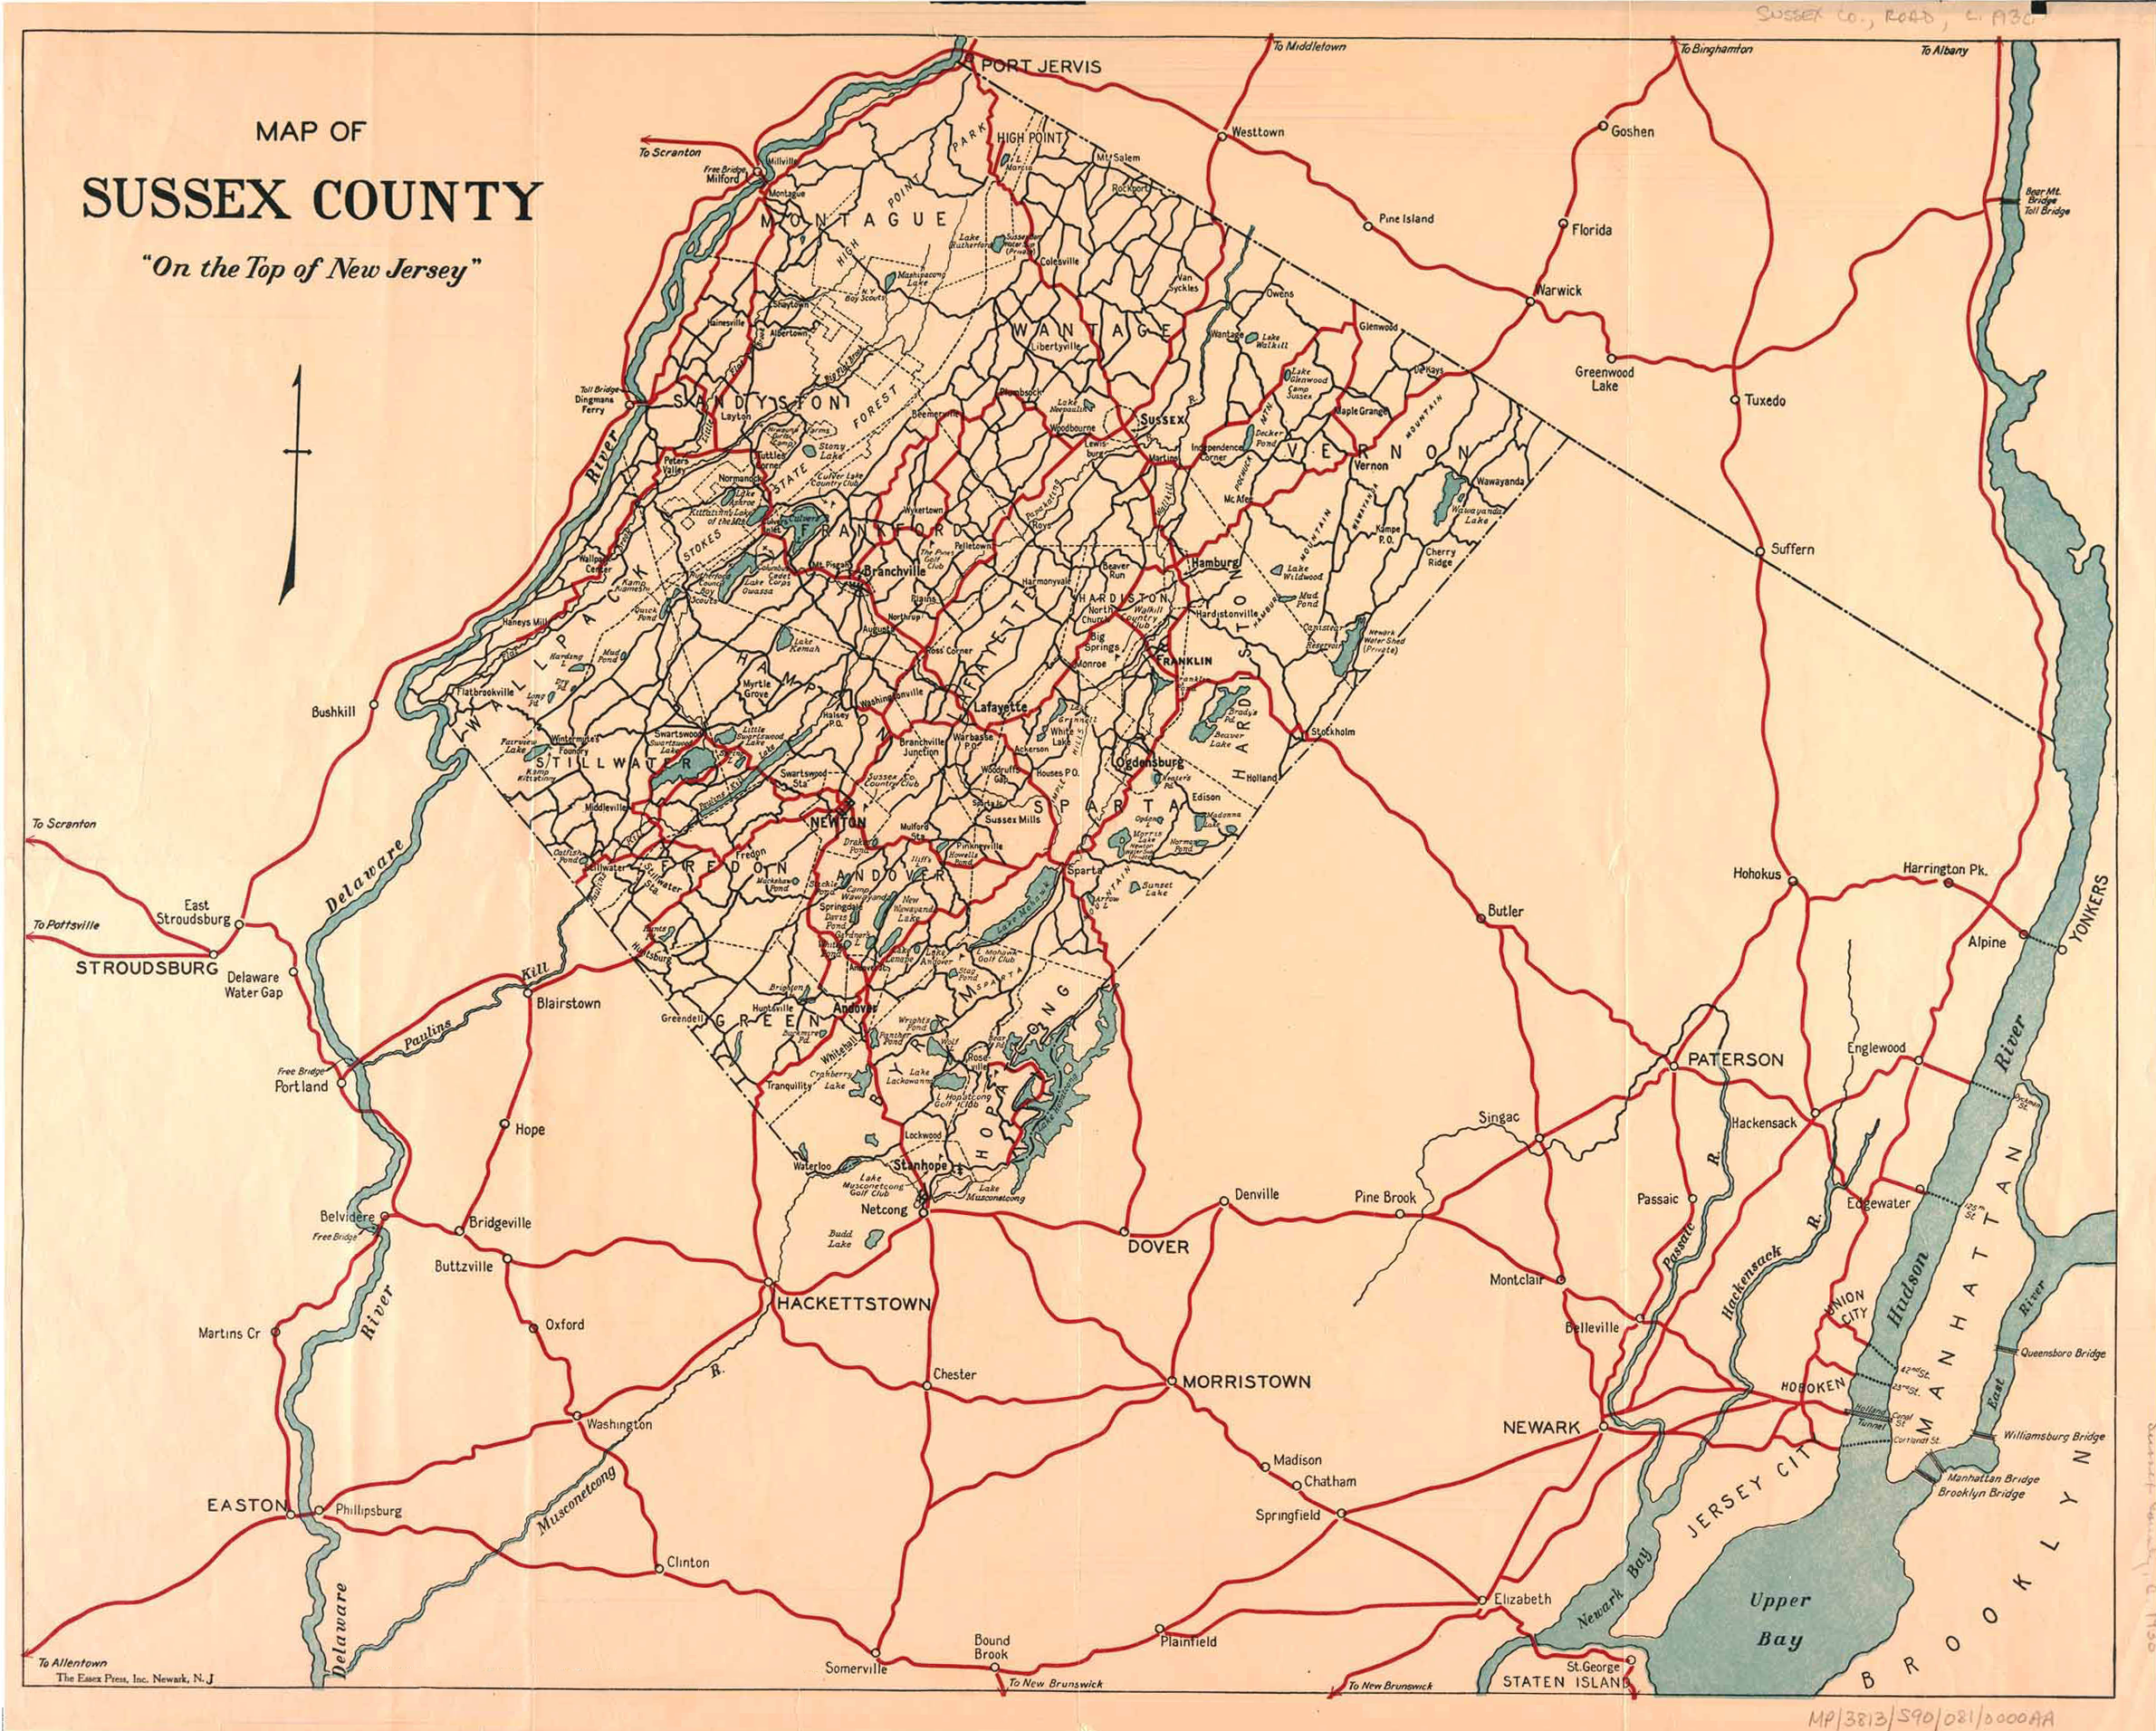 Map of Sussex County circa 1930